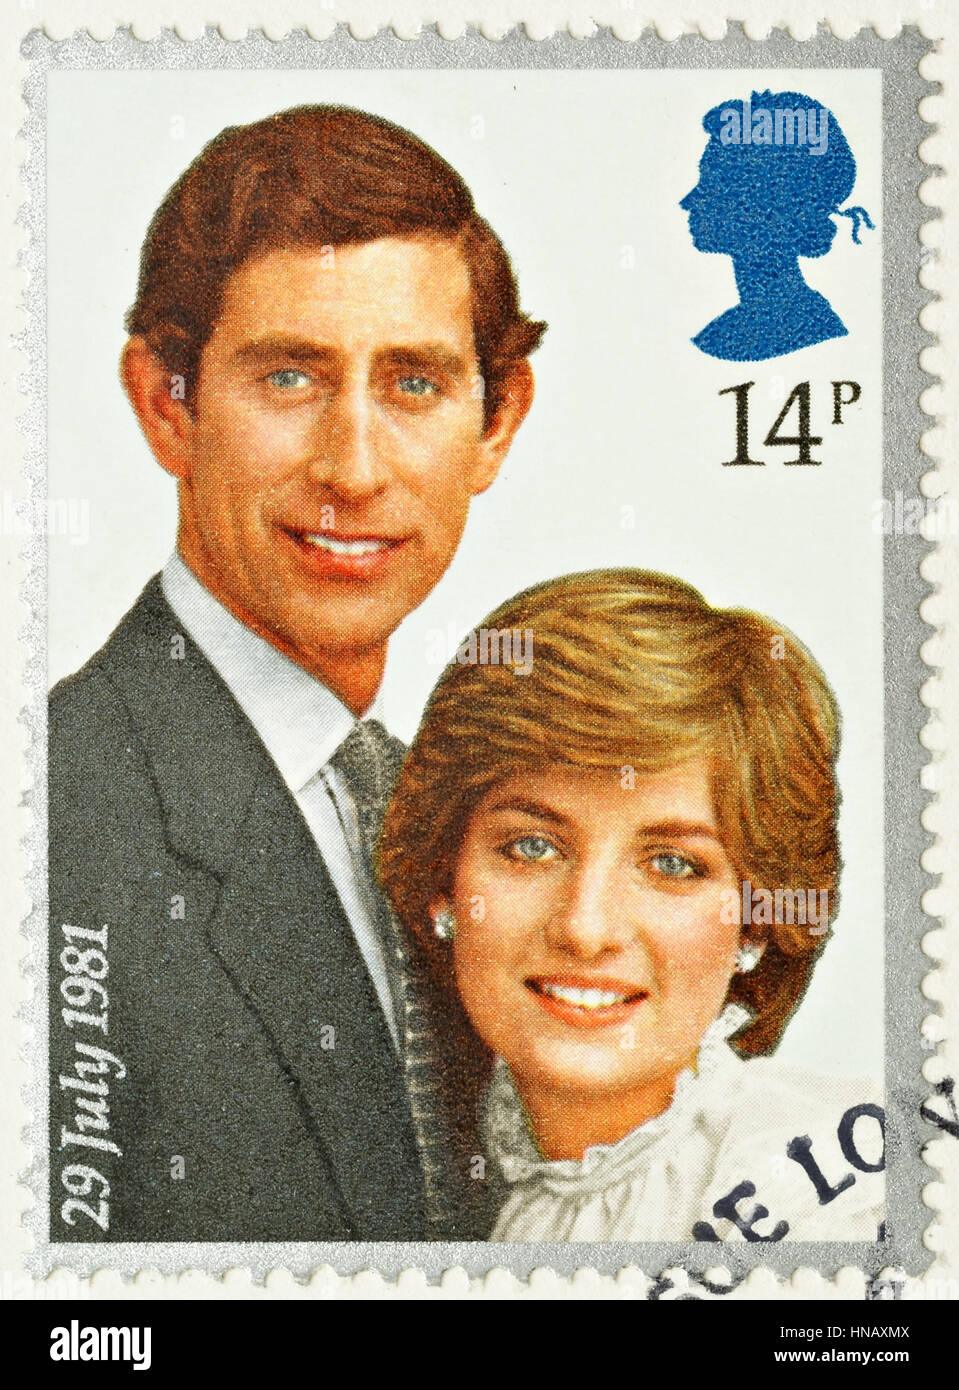 UNITED KINGDOM - CIRCA 1981: A British Used Postage Stamp celebrating the Royal Wedding of Prince Charles and Lady Diana Spencer Stock Photo